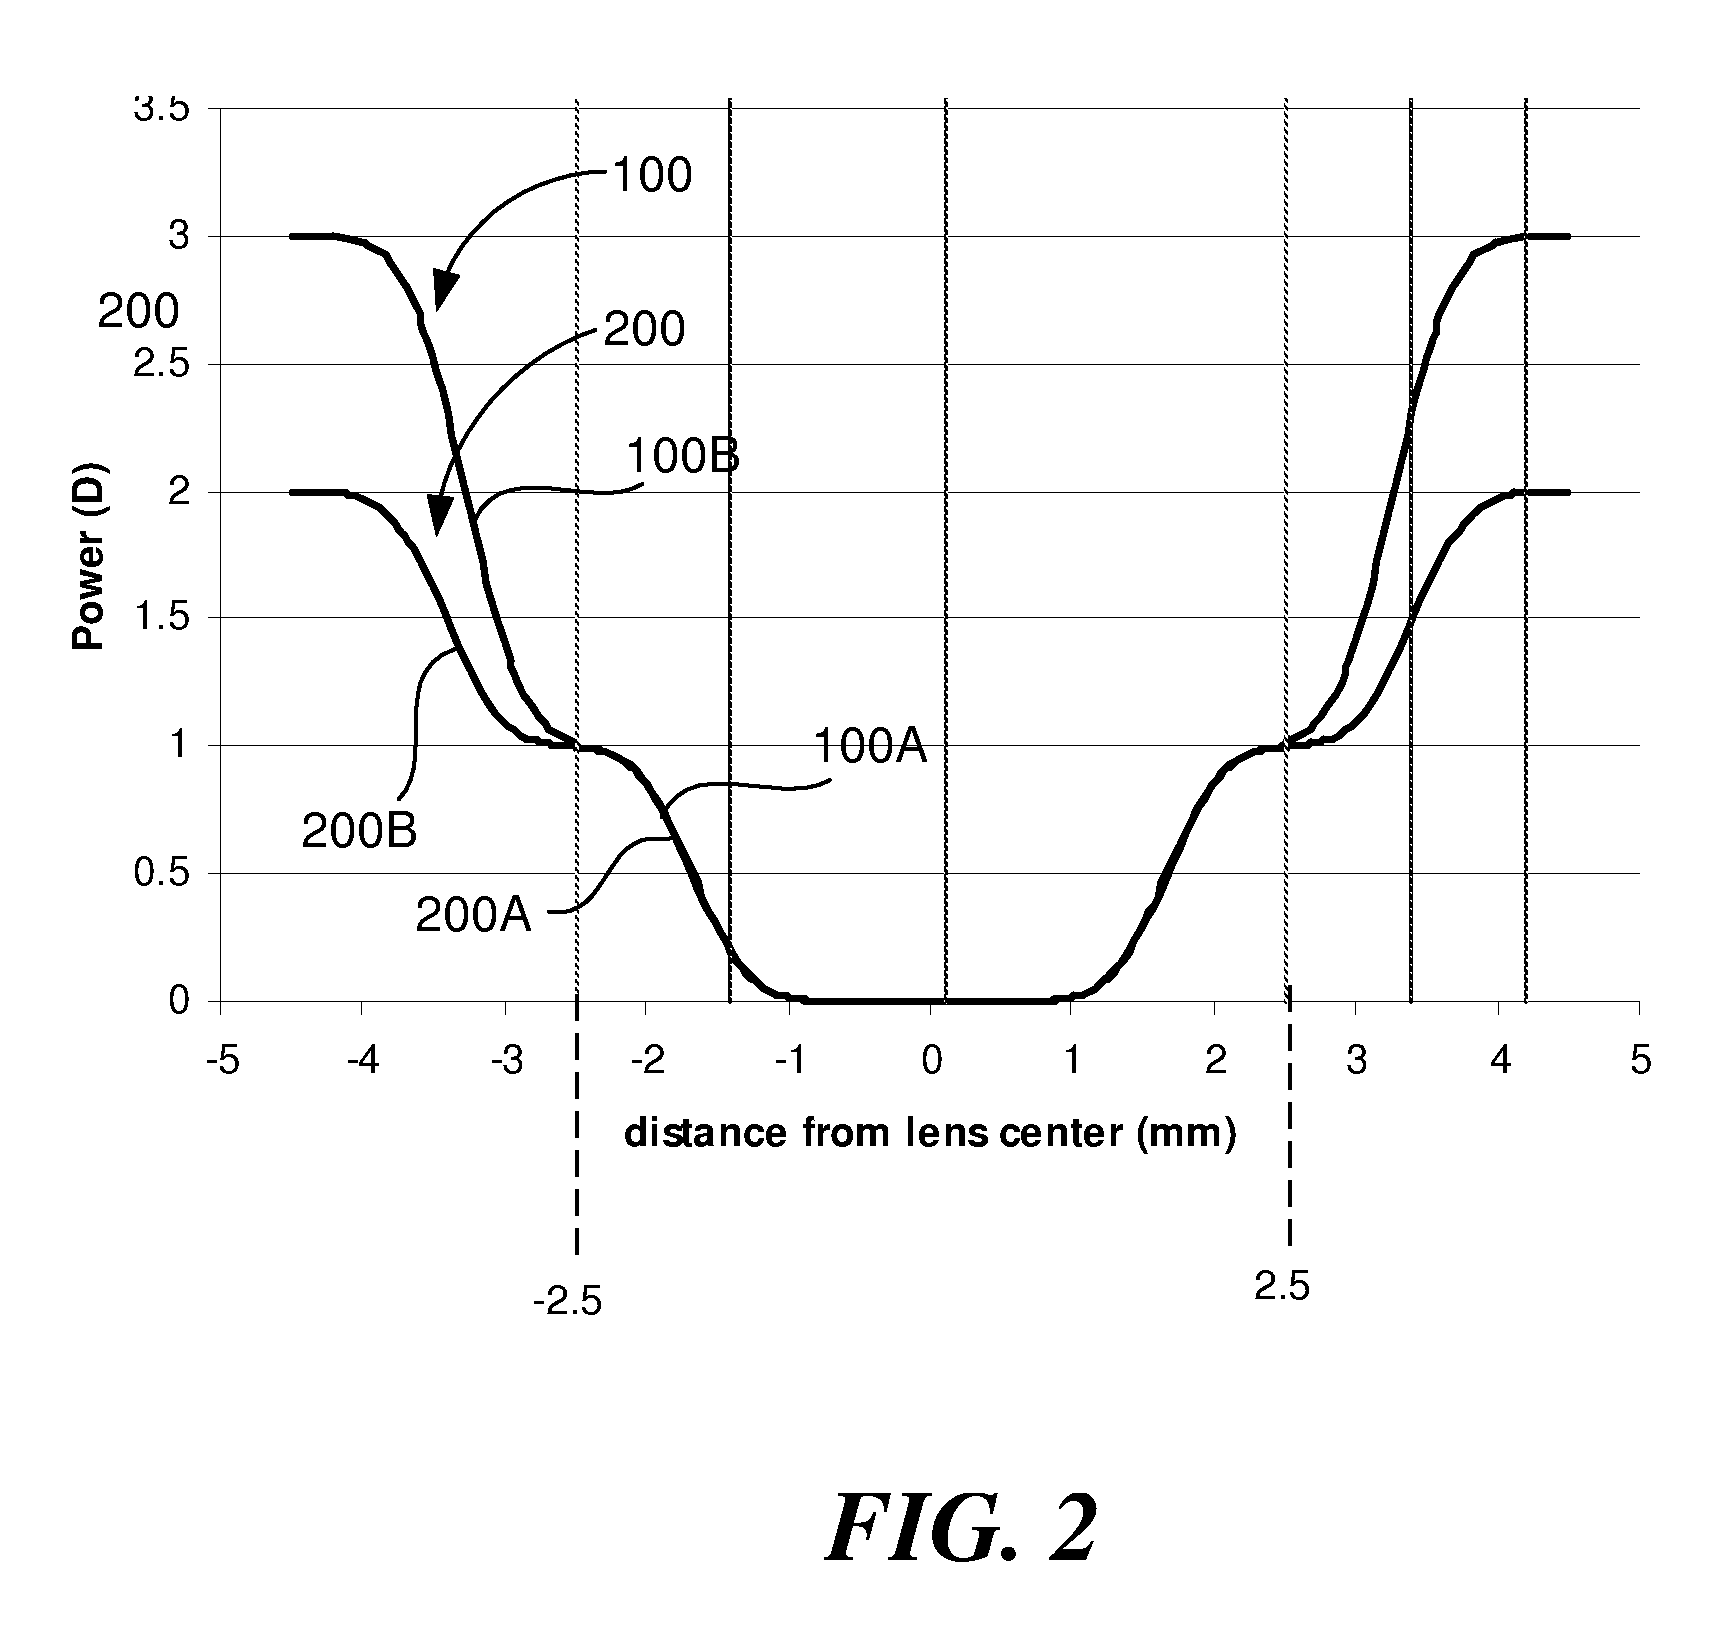 Lens design and method for preventing or slowing the progression of myopia